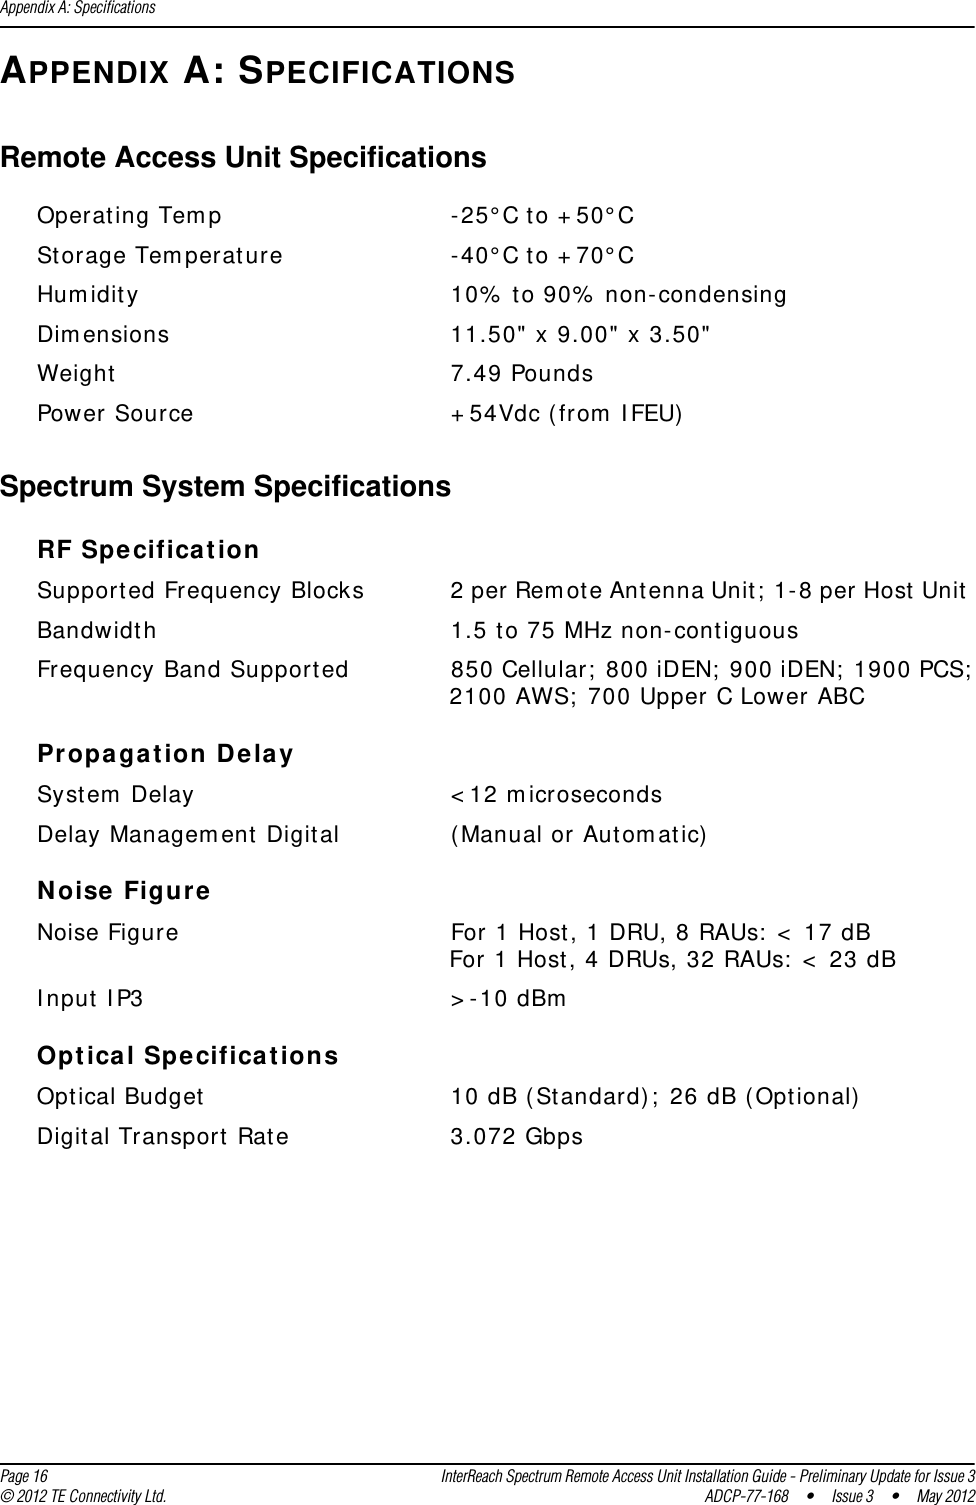 Appendix A: Specifications  Page 16 InterReach Spectrum Remote Access Unit Installation Guide - Preliminary Update for Issue 3© 2012 TE Connectivity Ltd. ADCP-77-168 • Issue 3 • May 2012APPENDIX A: SPECIFICATIONSRemote Access Unit SpecificationsOperating Temp -25°C to +50°CStorage Temperature -40°C to +70°CHumidity 10% to 90% non-condensingDimensions 11.50&quot; x 9.00&quot; x 3.50&quot;Weight 7.49 PoundsPower Source +54Vdc (from IFEU)Spectrum System SpecificationsRF SpecificationSupported Frequency Blocks 2 per Remote Antenna Unit; 1-8 per Host Unit Bandwidth 1.5 to 75 MHz non-contiguousFrequency Band Supported 850 Cellular; 800 iDEN; 900 iDEN; 1900 PCS; 2100 AWS; 700 Upper C Lower ABCPropagation DelaySystem Delay &lt;12 microsecondsDelay Management Digital (Manual or Automatic)Noise FigureNoise Figure For 1 Host, 1 DRU, 8 RAUs: &lt; 17 dBFor 1 Host, 4 DRUs, 32 RAUs: &lt; 23 dBInput IP3 &gt;-10 dBmOptical SpecificationsOptical Budget 10 dB (Standard); 26 dB (Optional)Digital Transport Rate 3.072 Gbps